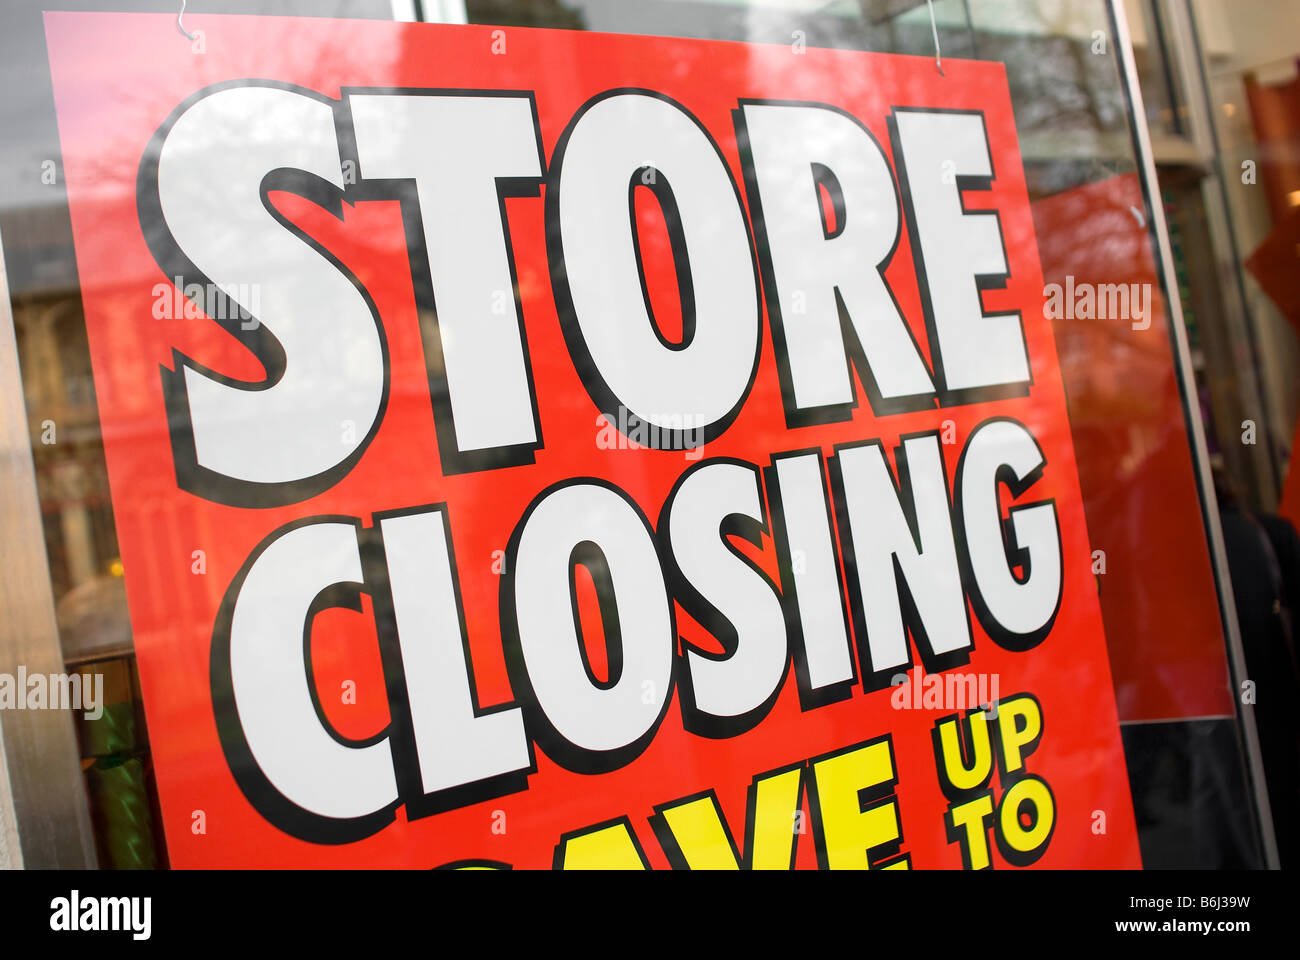 store closing down sale window poster Stock Photo